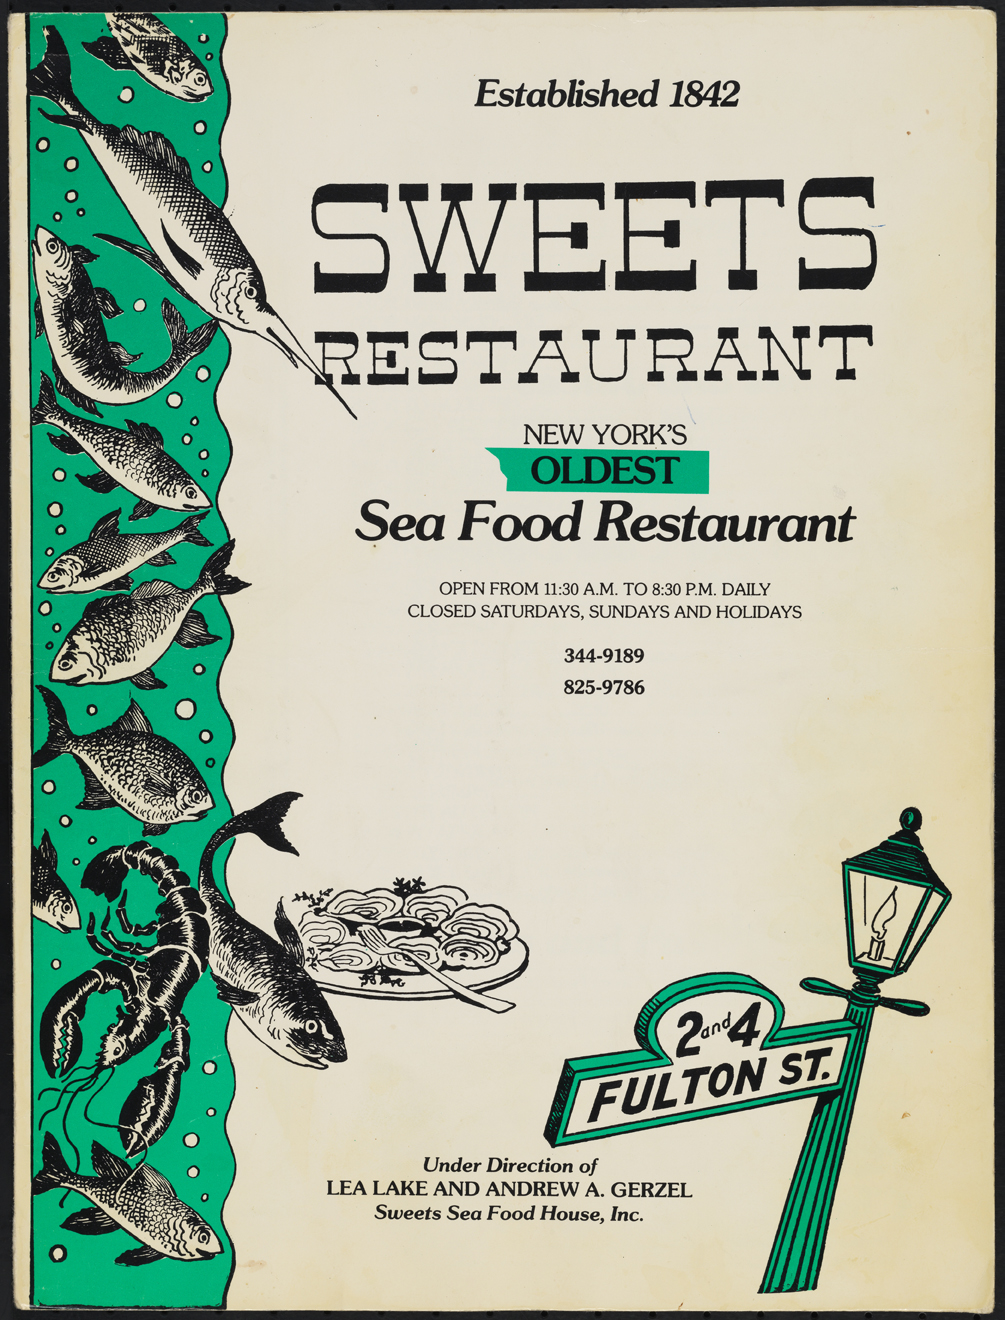 Sweets Restaurant. 1975-1992. Museum of the City of New York. 97.146.343